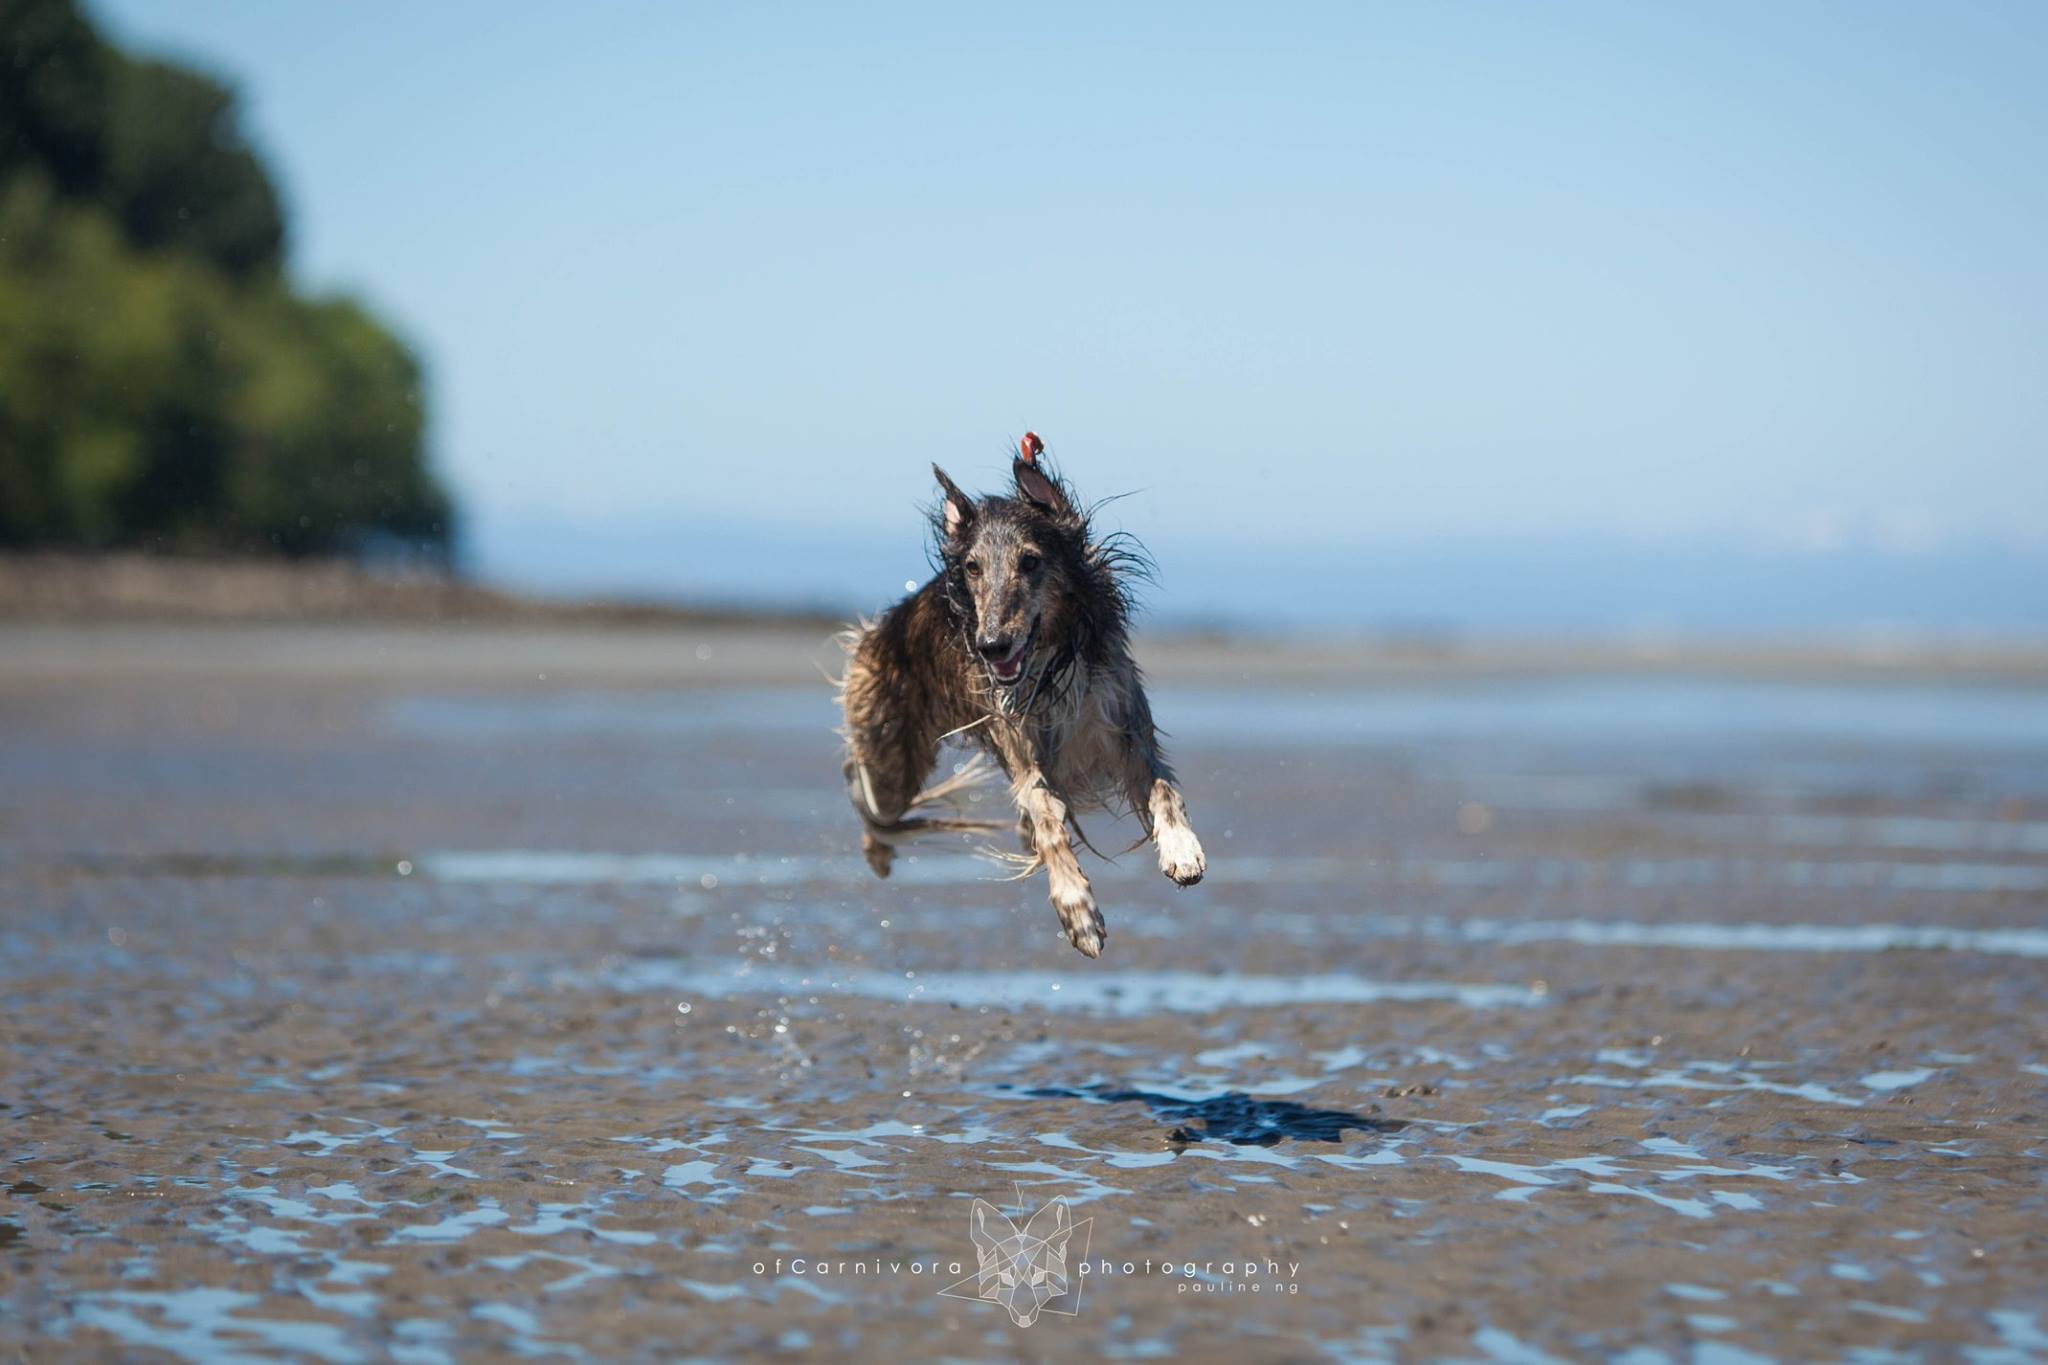 A silkenwindhound with all four feet off the ground while running. Photo credit Pauline Ng